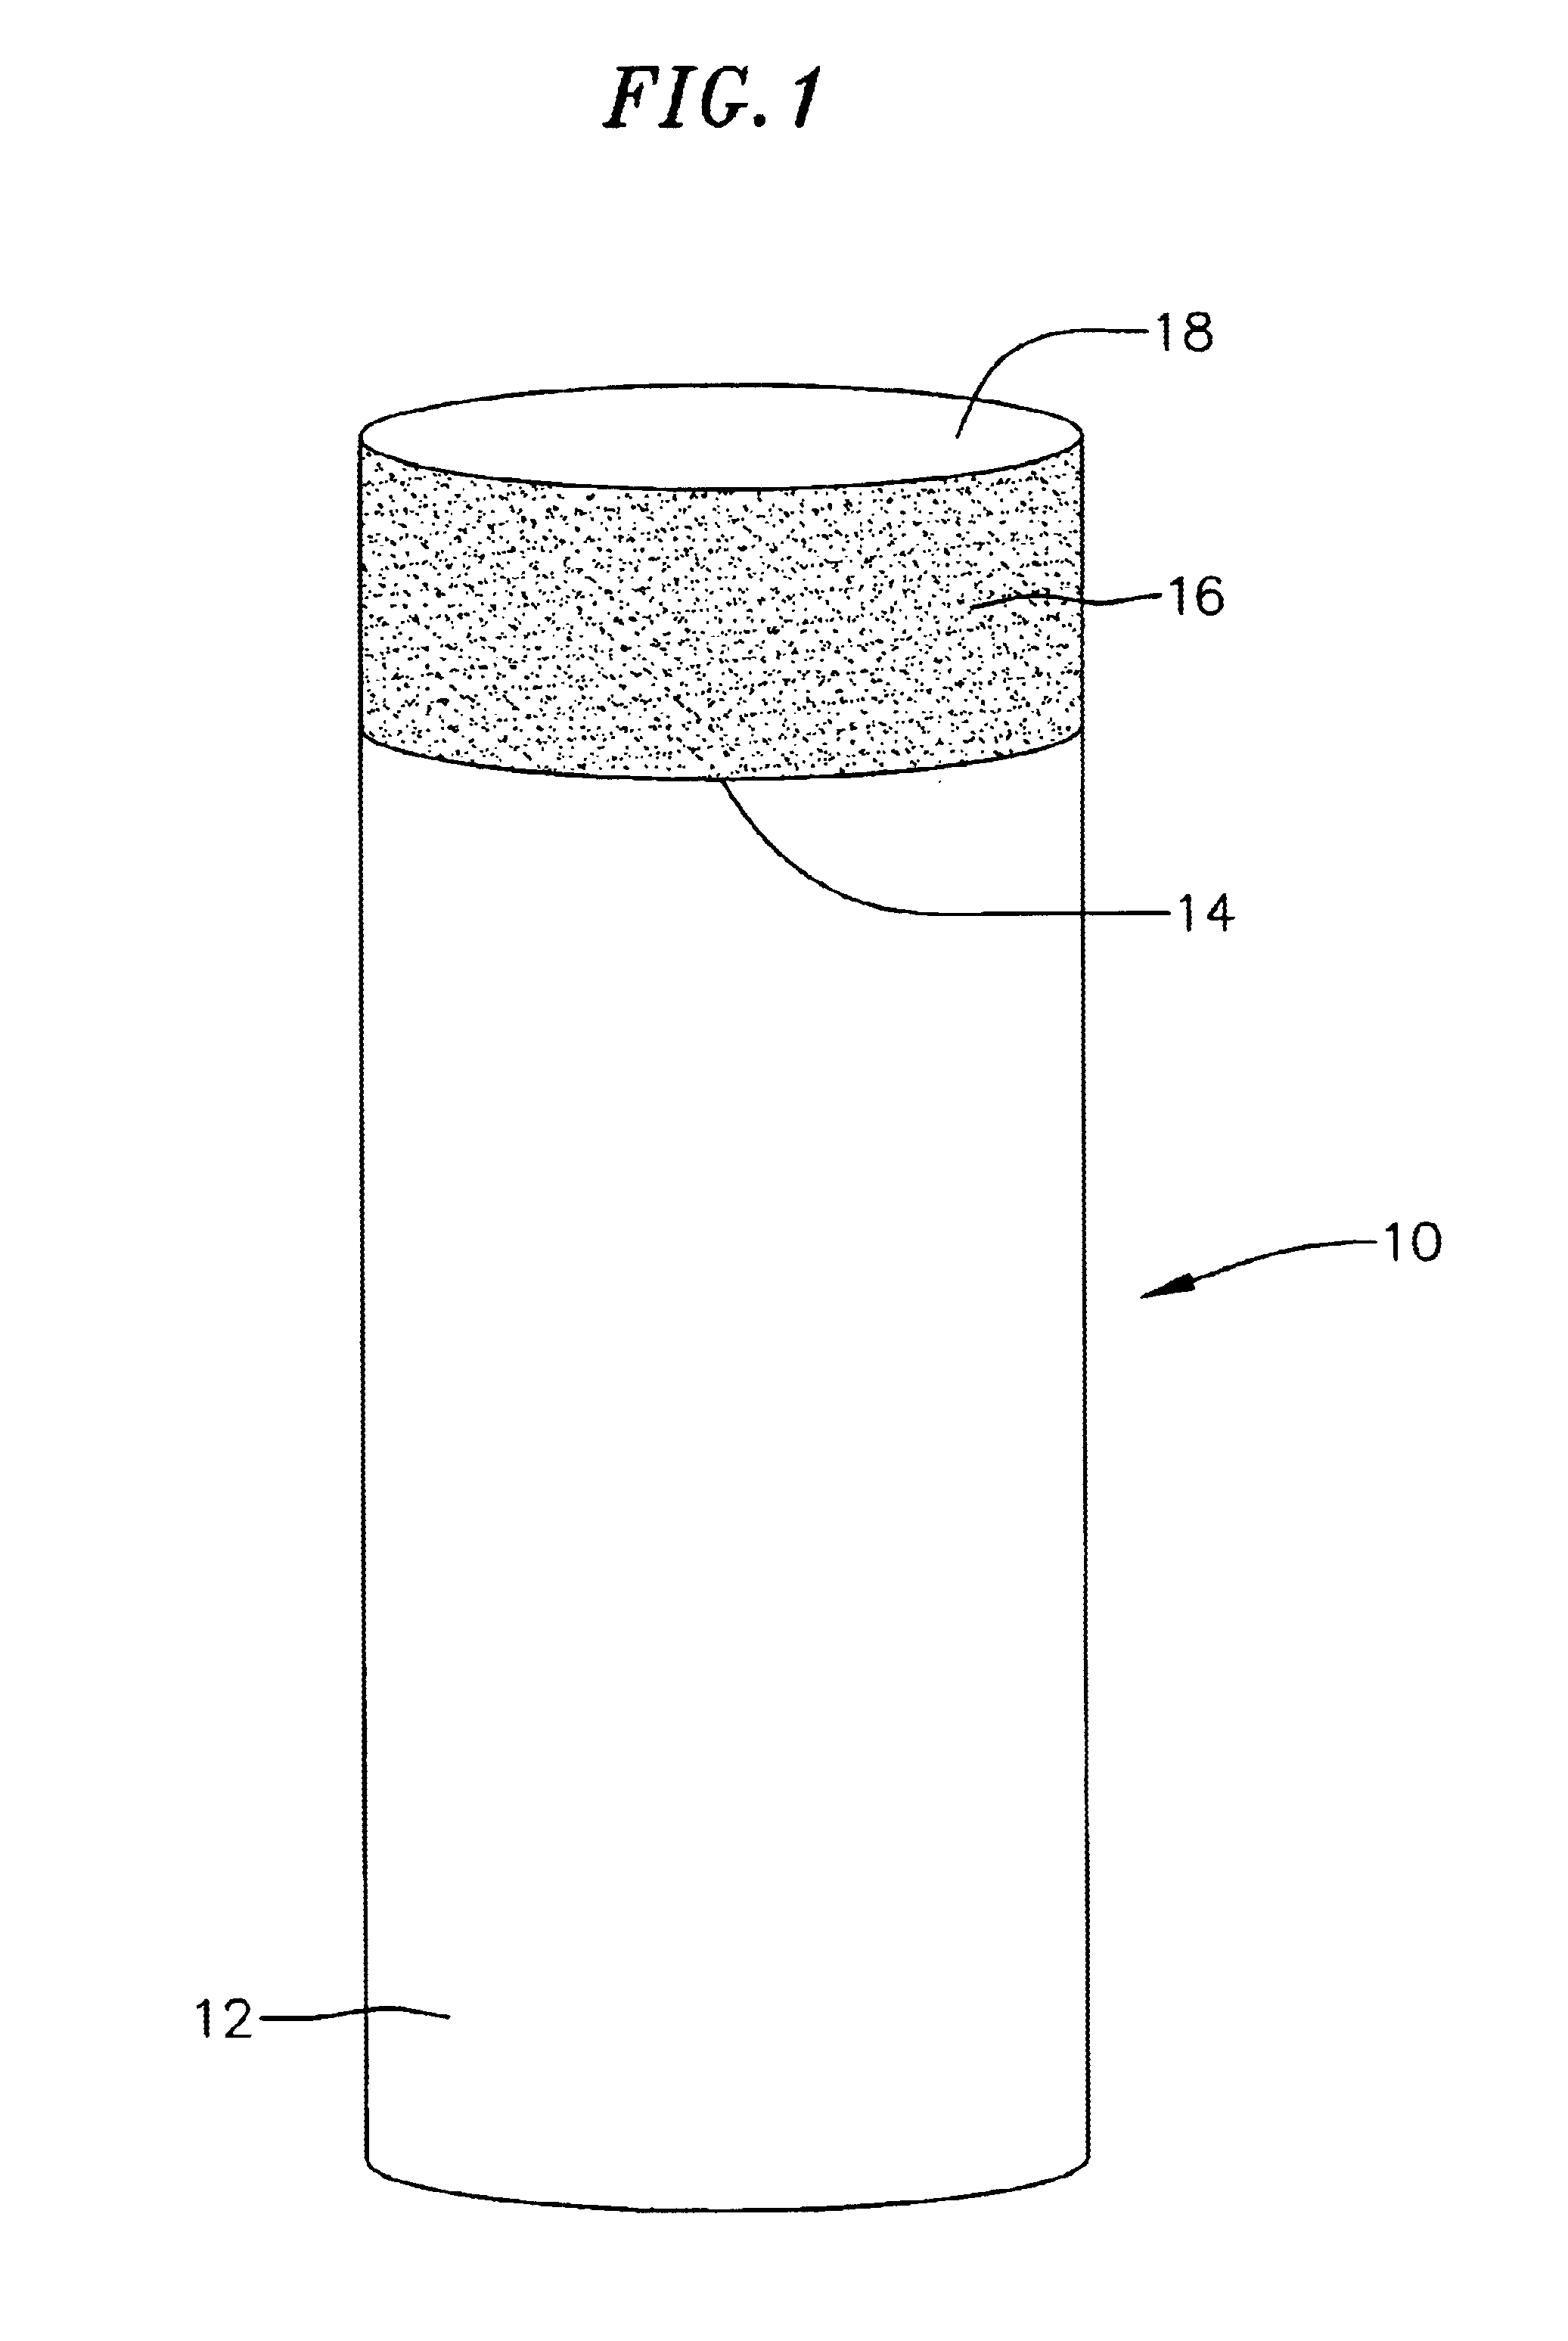 Method of forming cutting elements